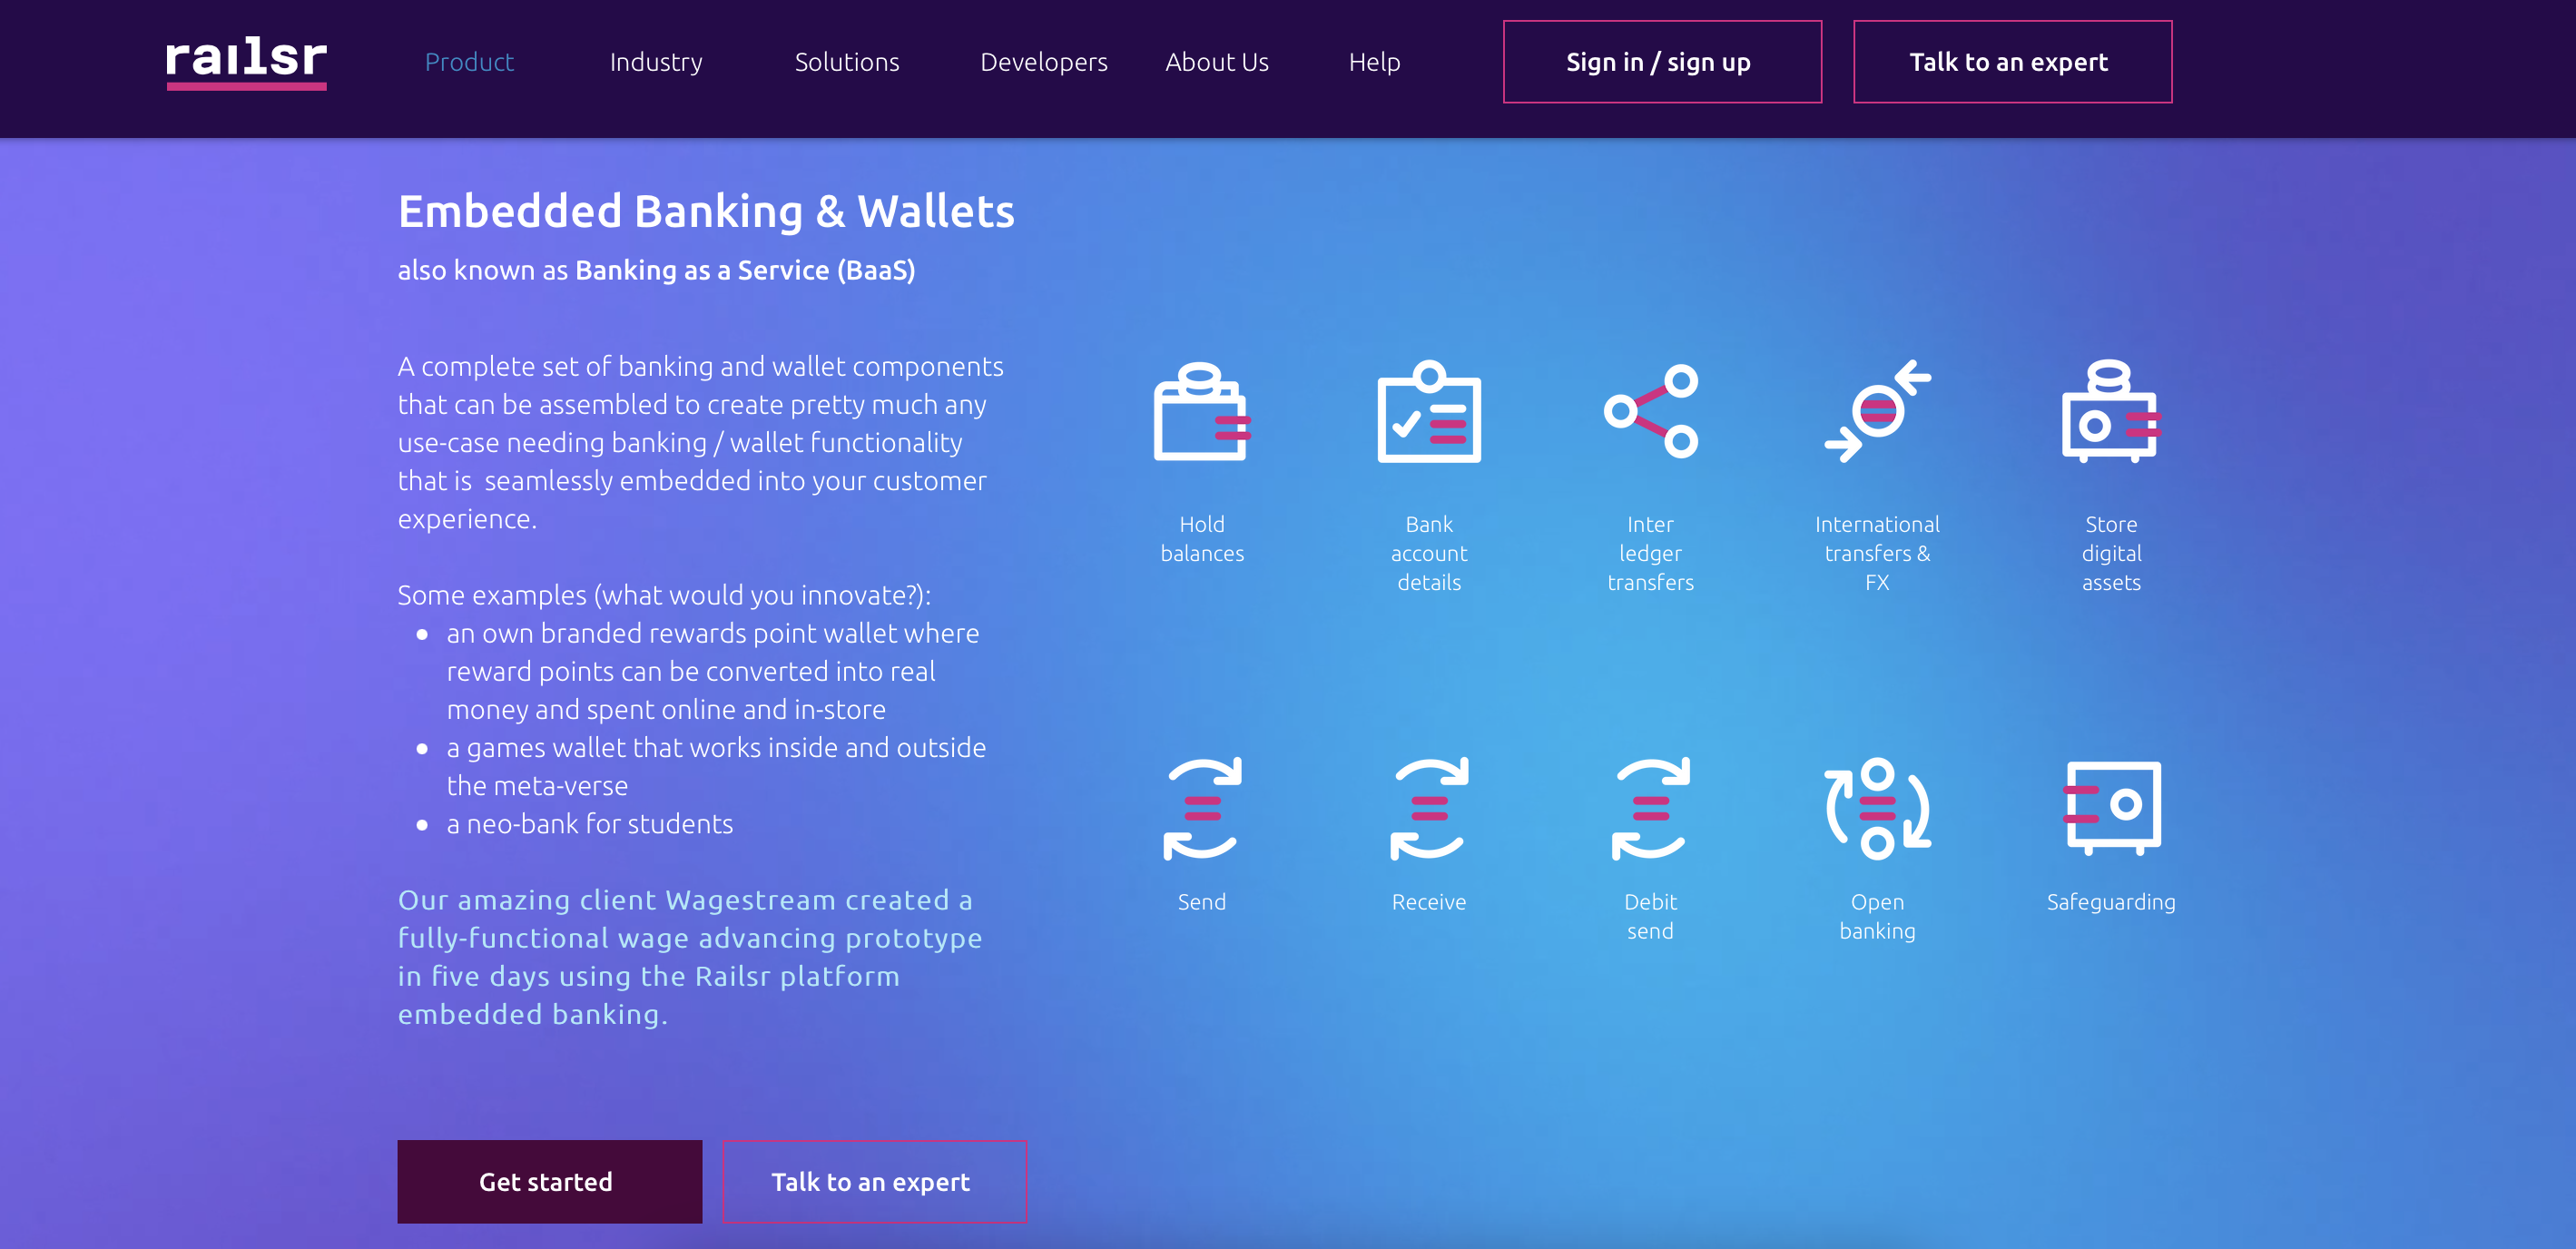 The provider of embedded banking and wallets, Railsr.